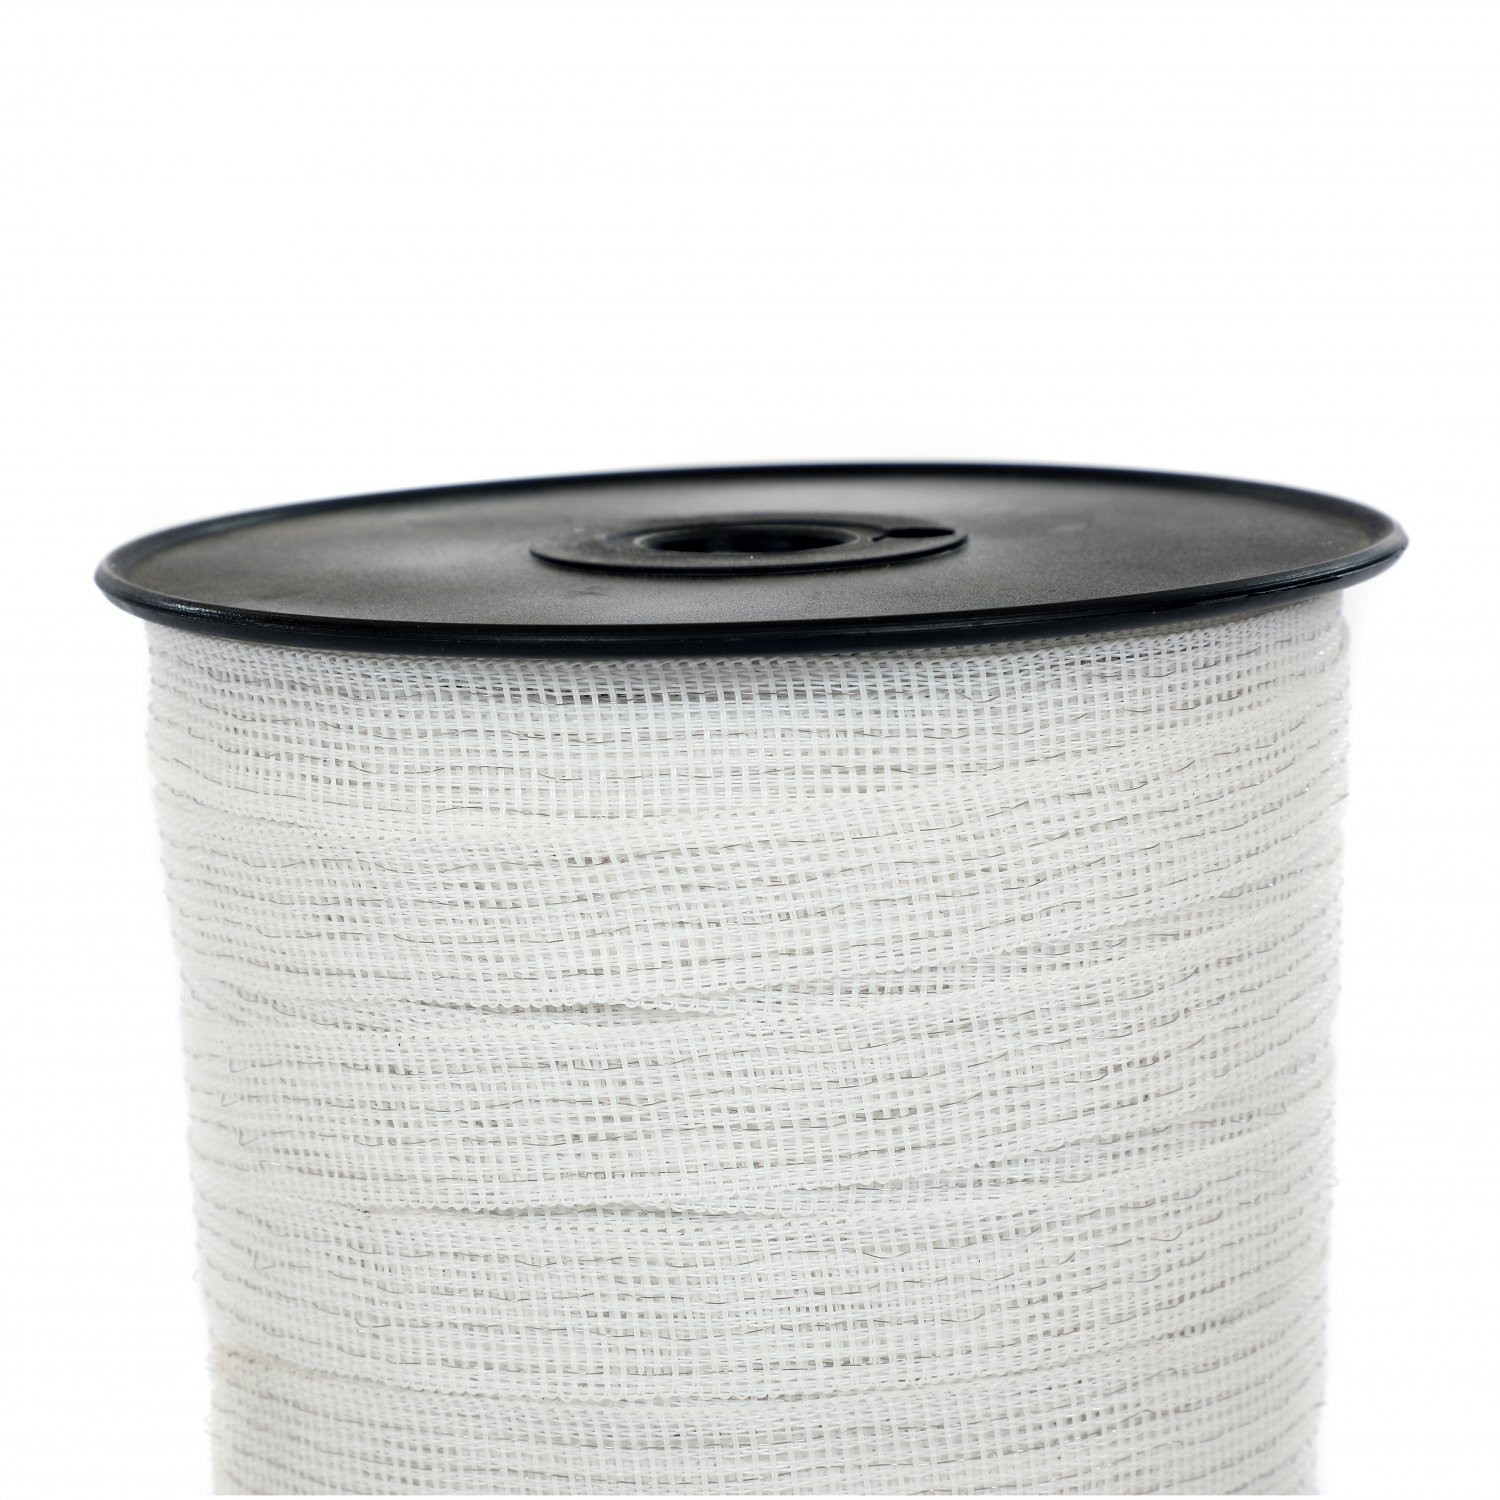 ELECTRIC FENCE TAPE 200 Metres x 20mm White Poly Fencing Horse Paddock Brand New 